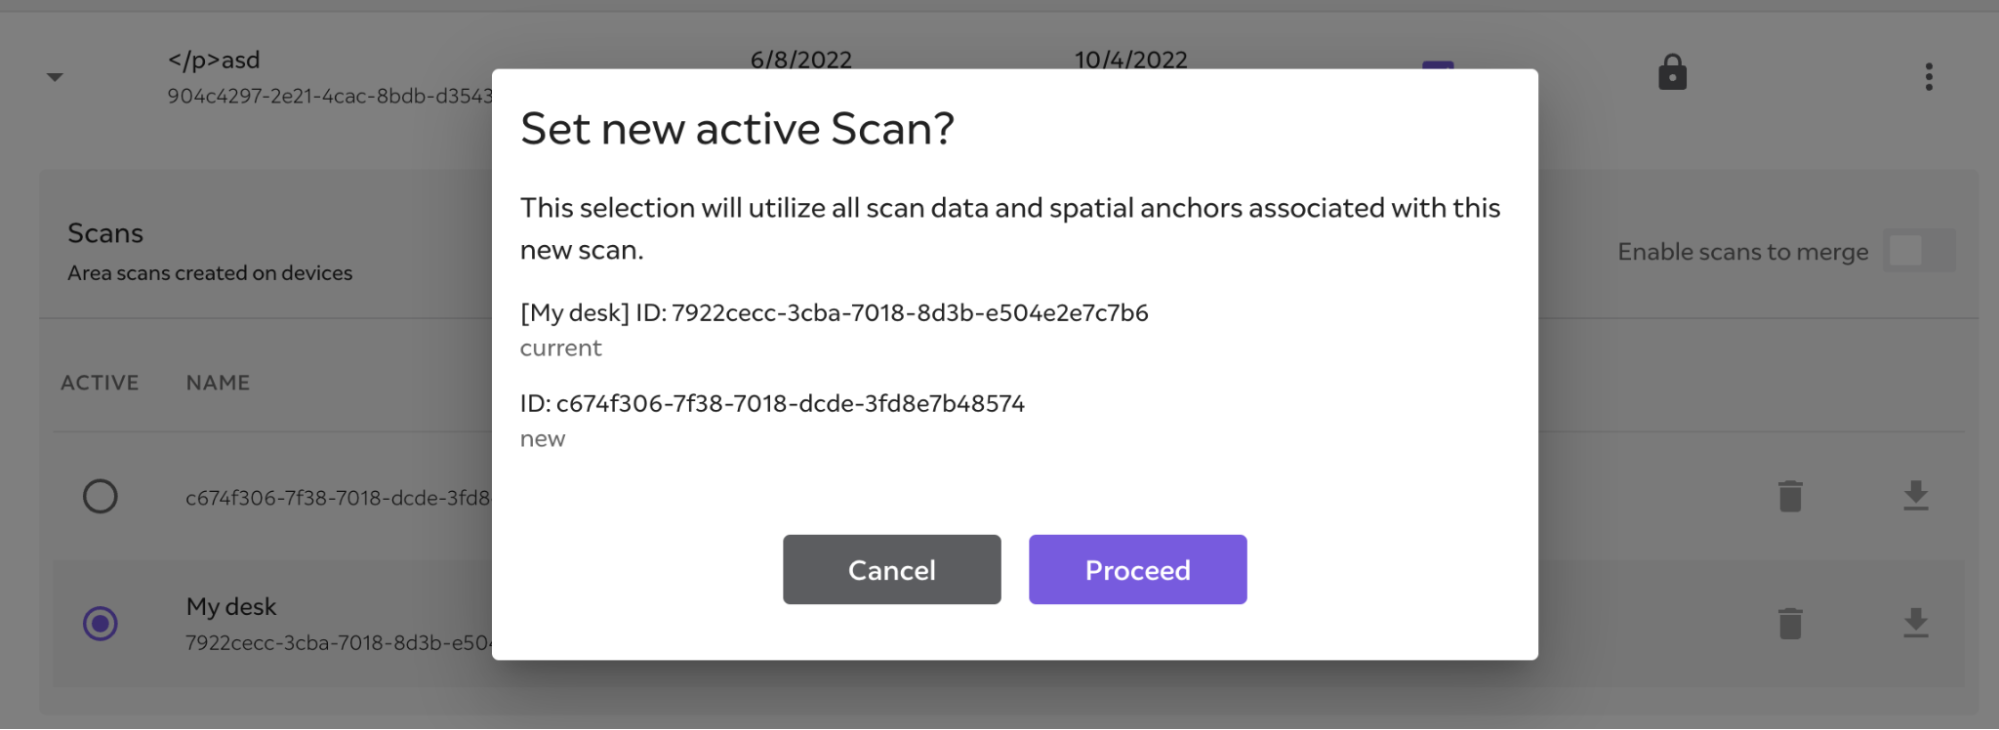 A prompt asking users if they wish to set a specific scan as active